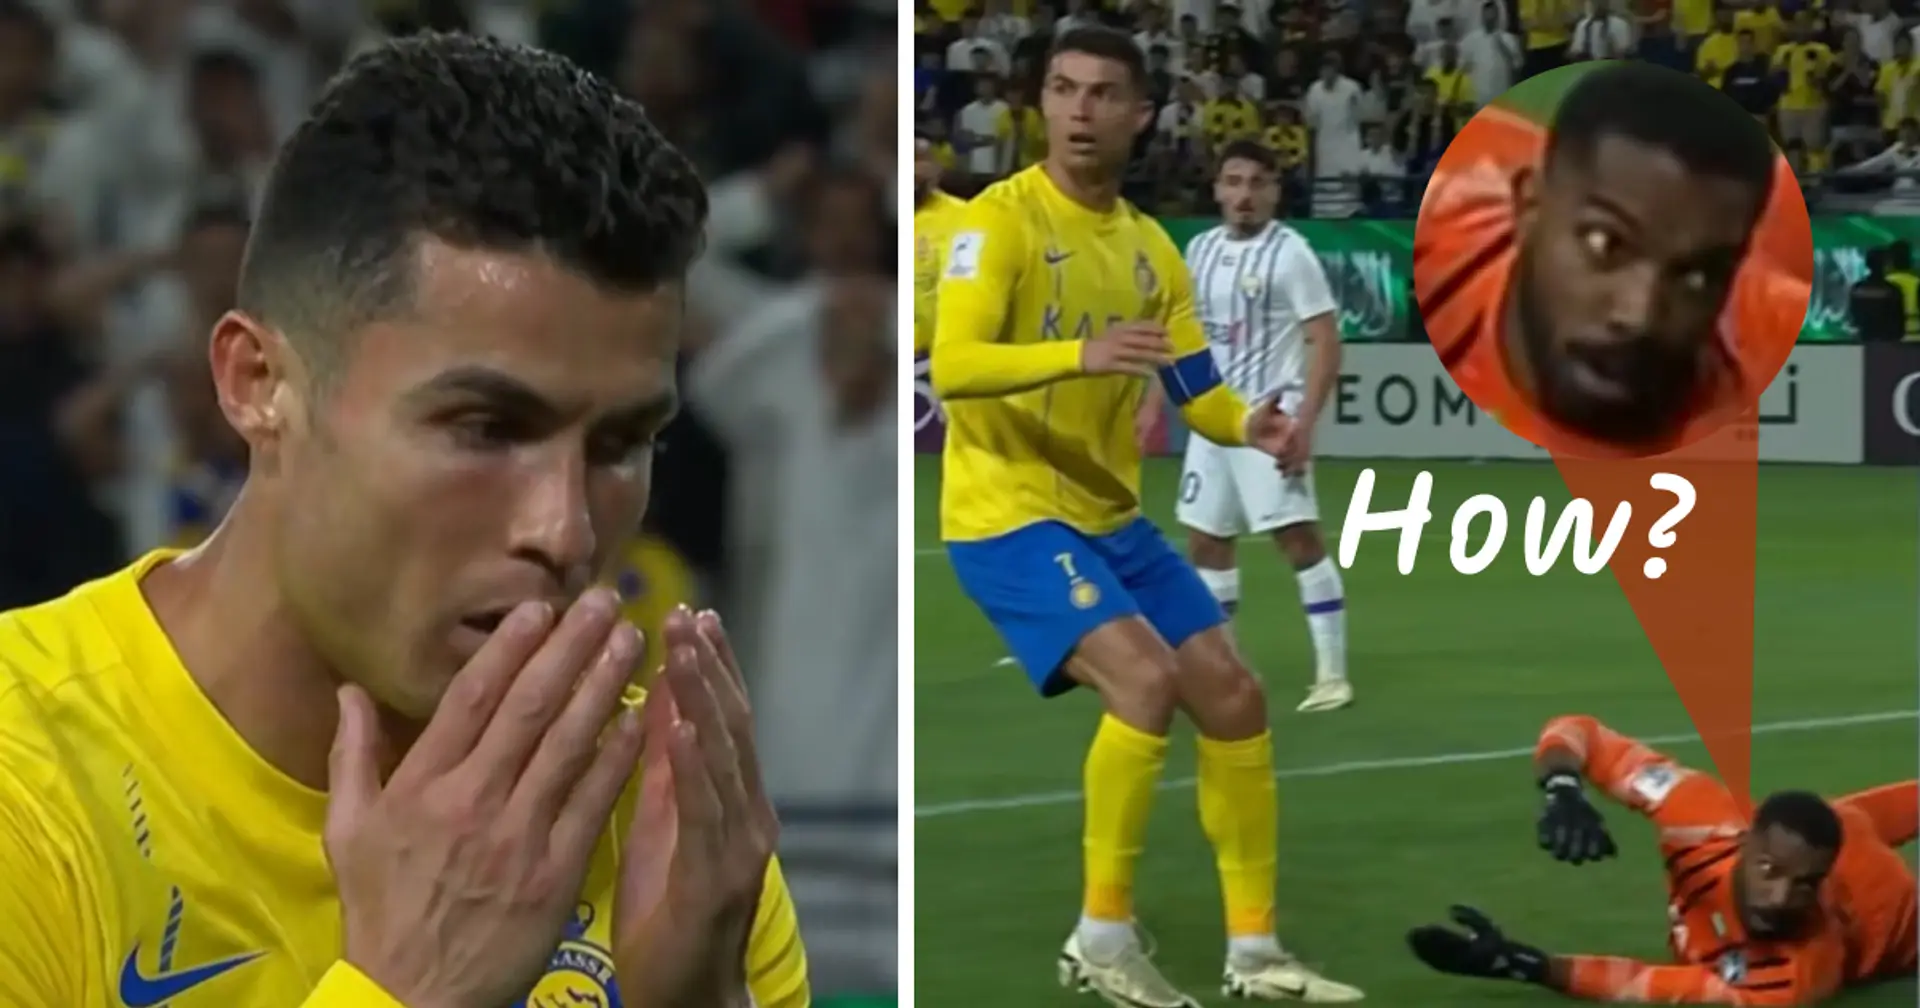 'When the game script is a little too obvious': Fans react to Ronaldo's unbelievable 3 yard miss 